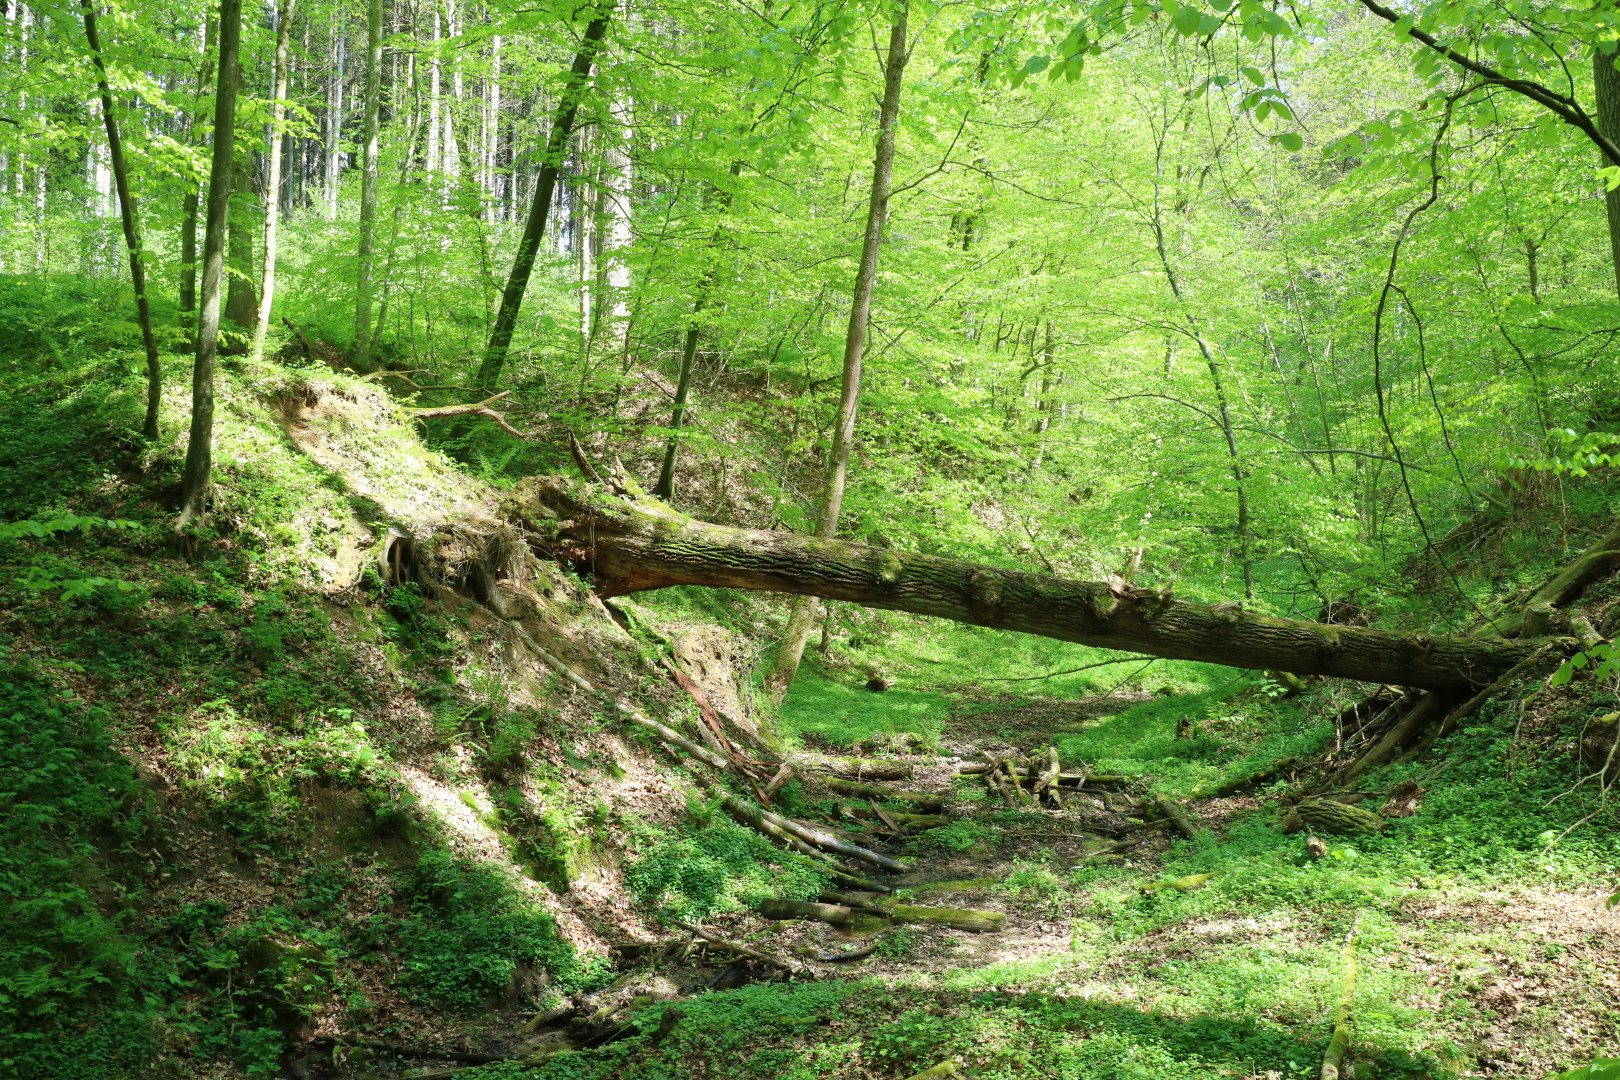 a fallen tree in the forest, very green